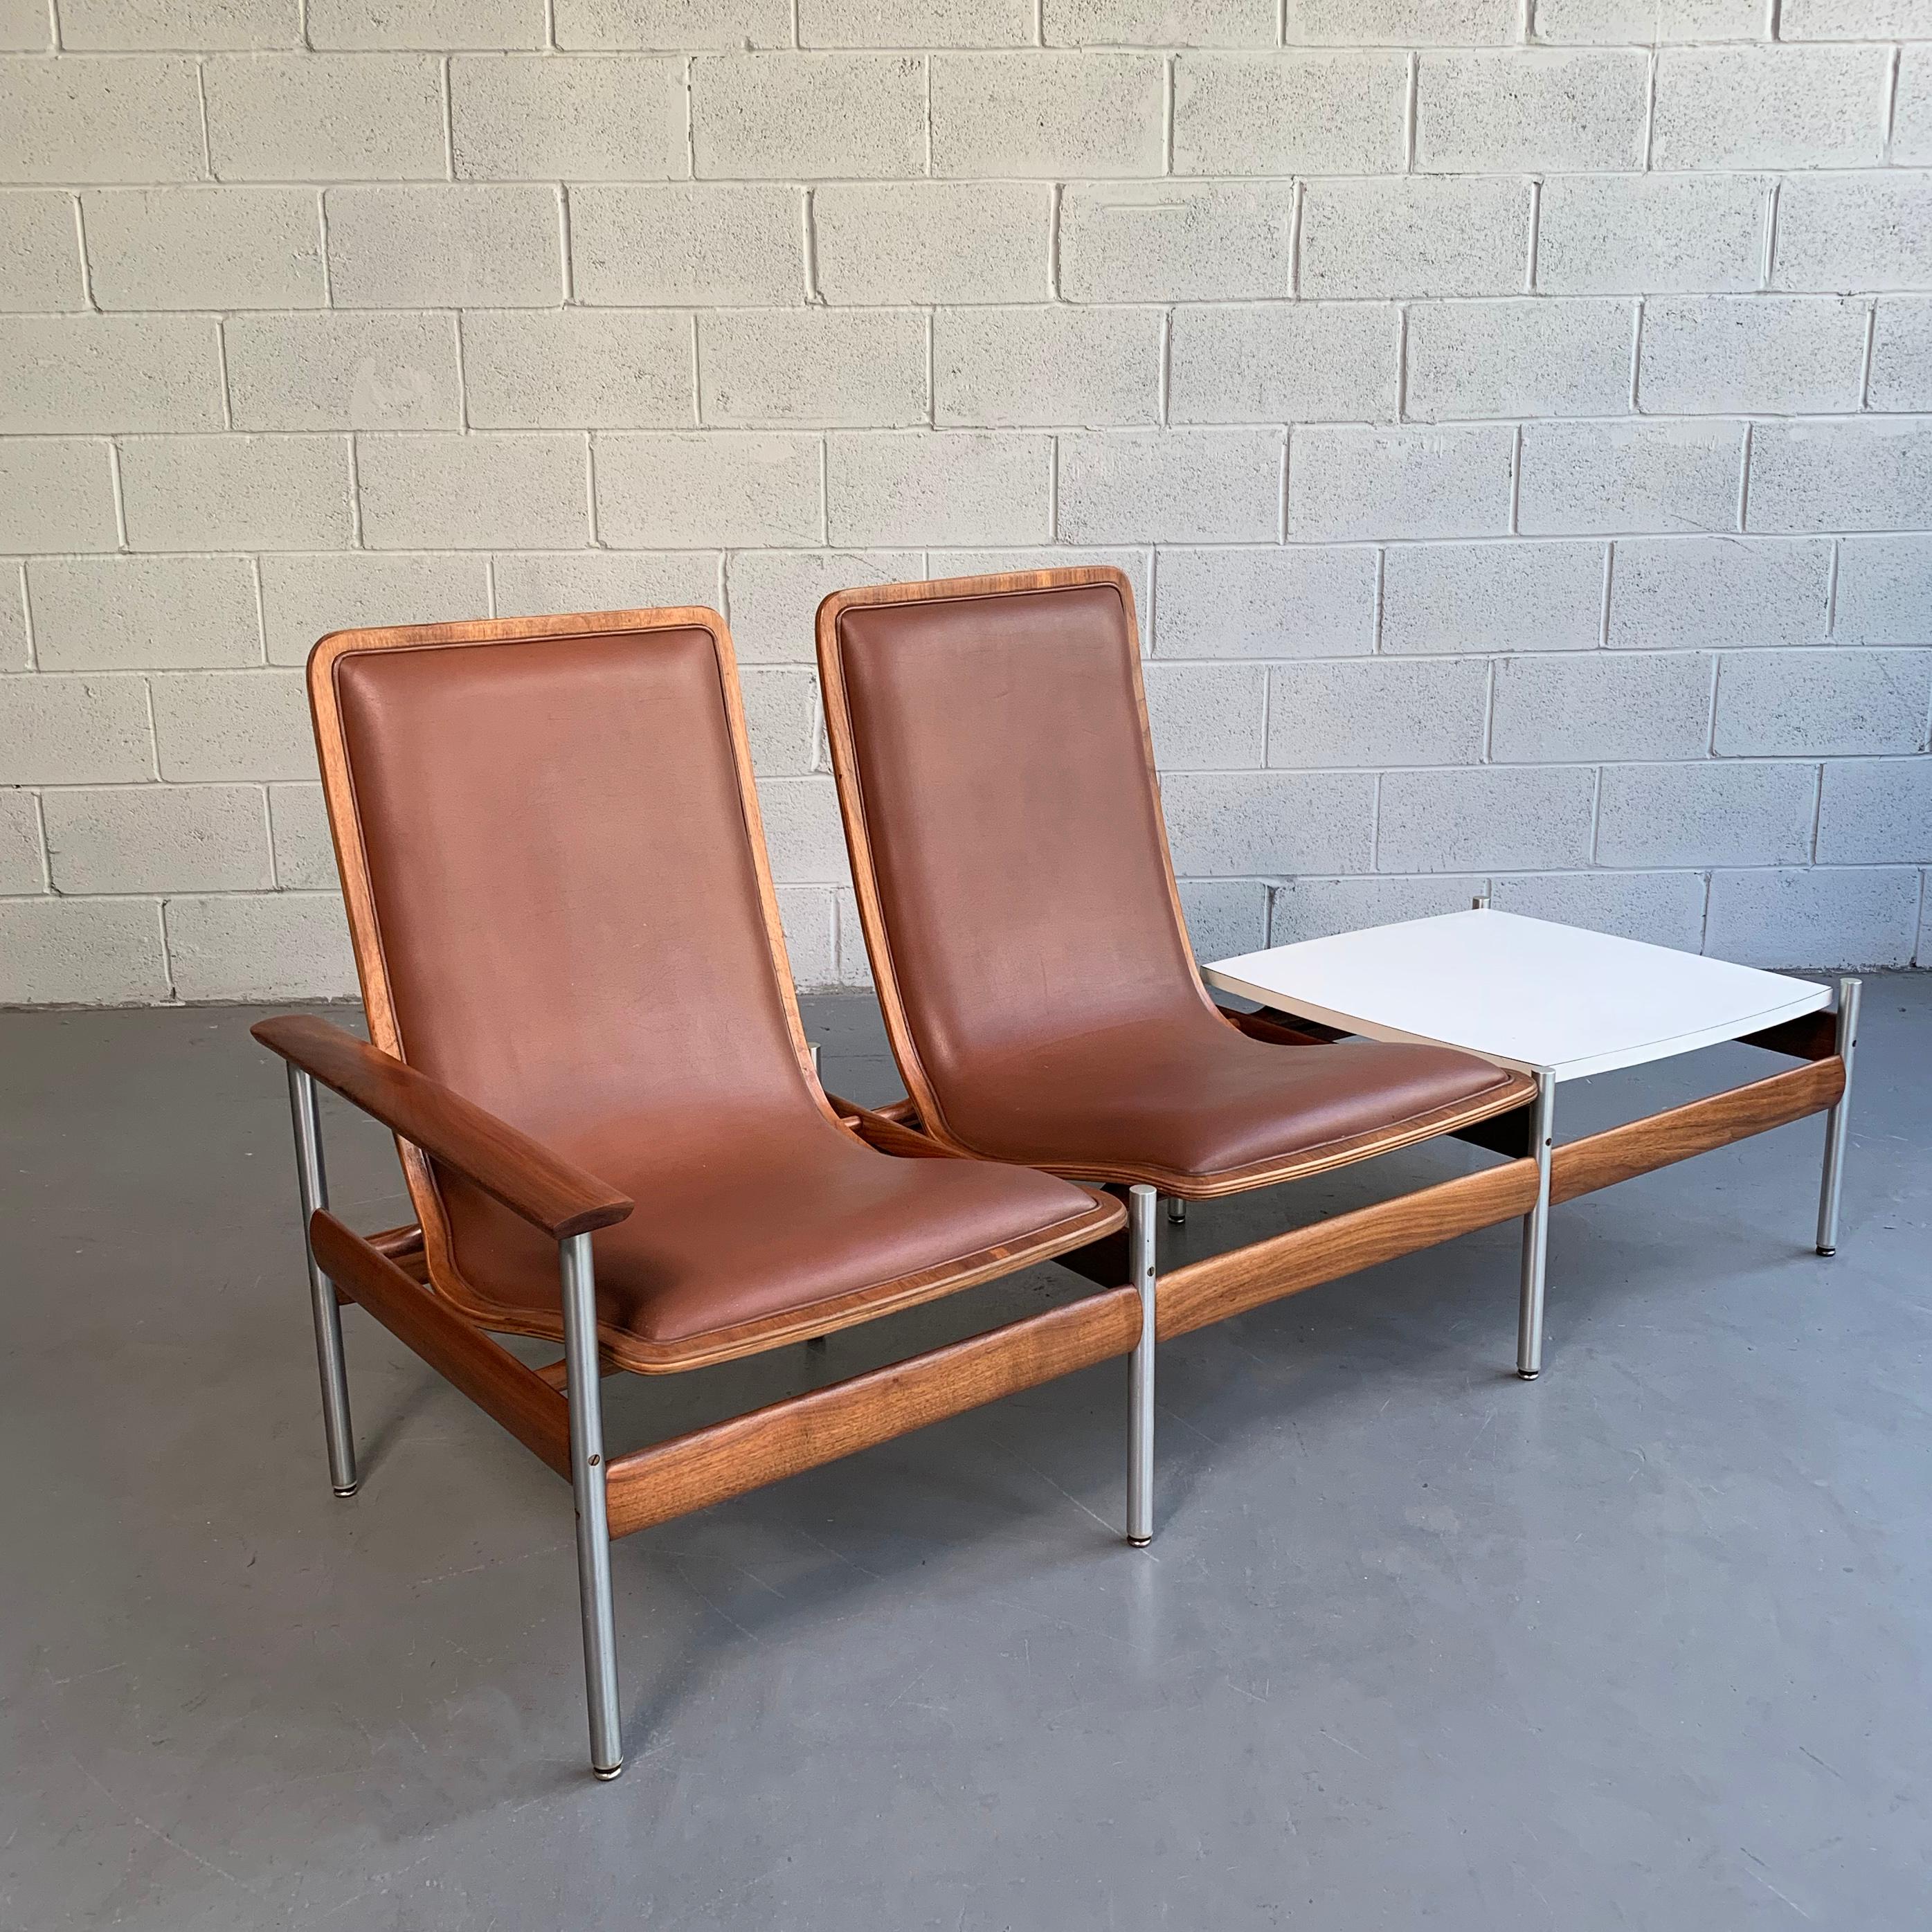 Scandinavian Modern, two-seat with side table ensemble designed in 1959 by Sven Ivar Dysthe for Fjord Fiesta, Norway features a tubular steel and walnut frame with vinyl upholstery and white formica tabletop. Table is 14 inches height.